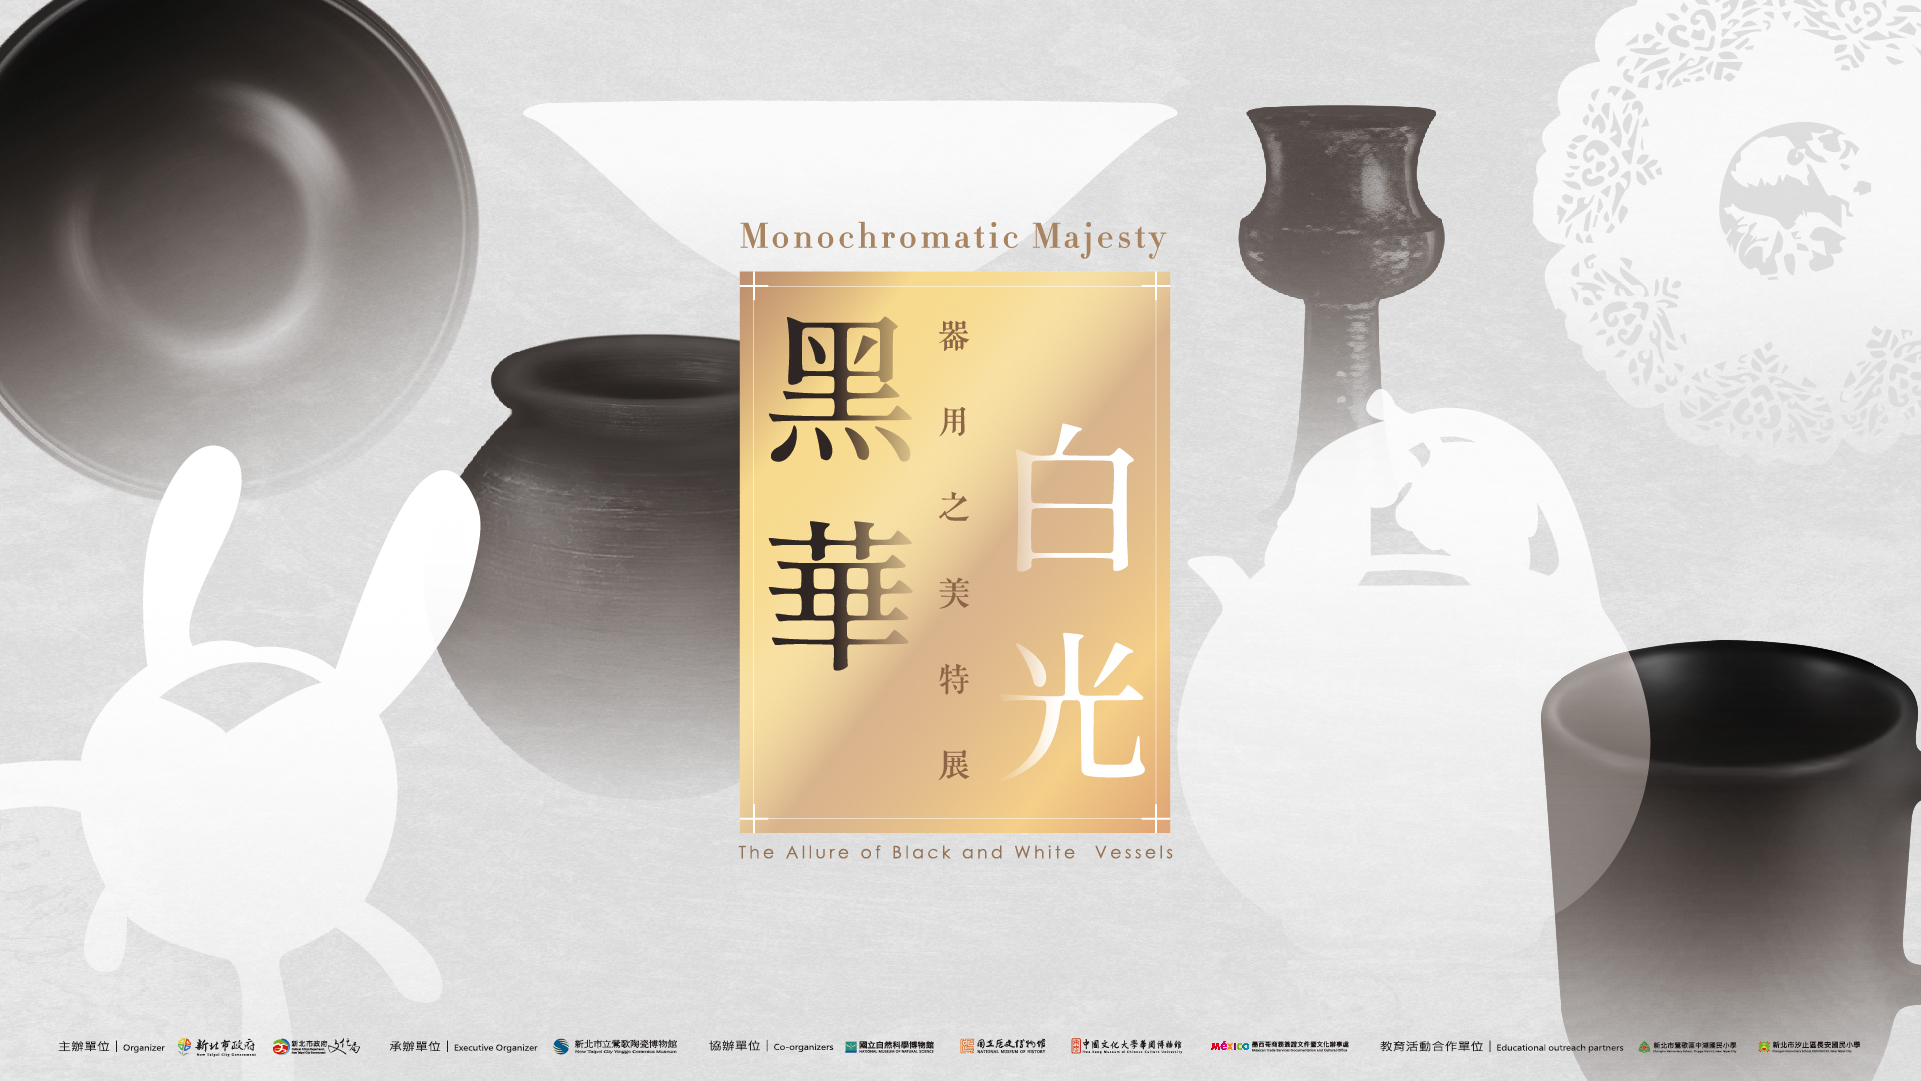 The Special Exhibition Monochromatic Majesty: the Allure of Black and White Vessels